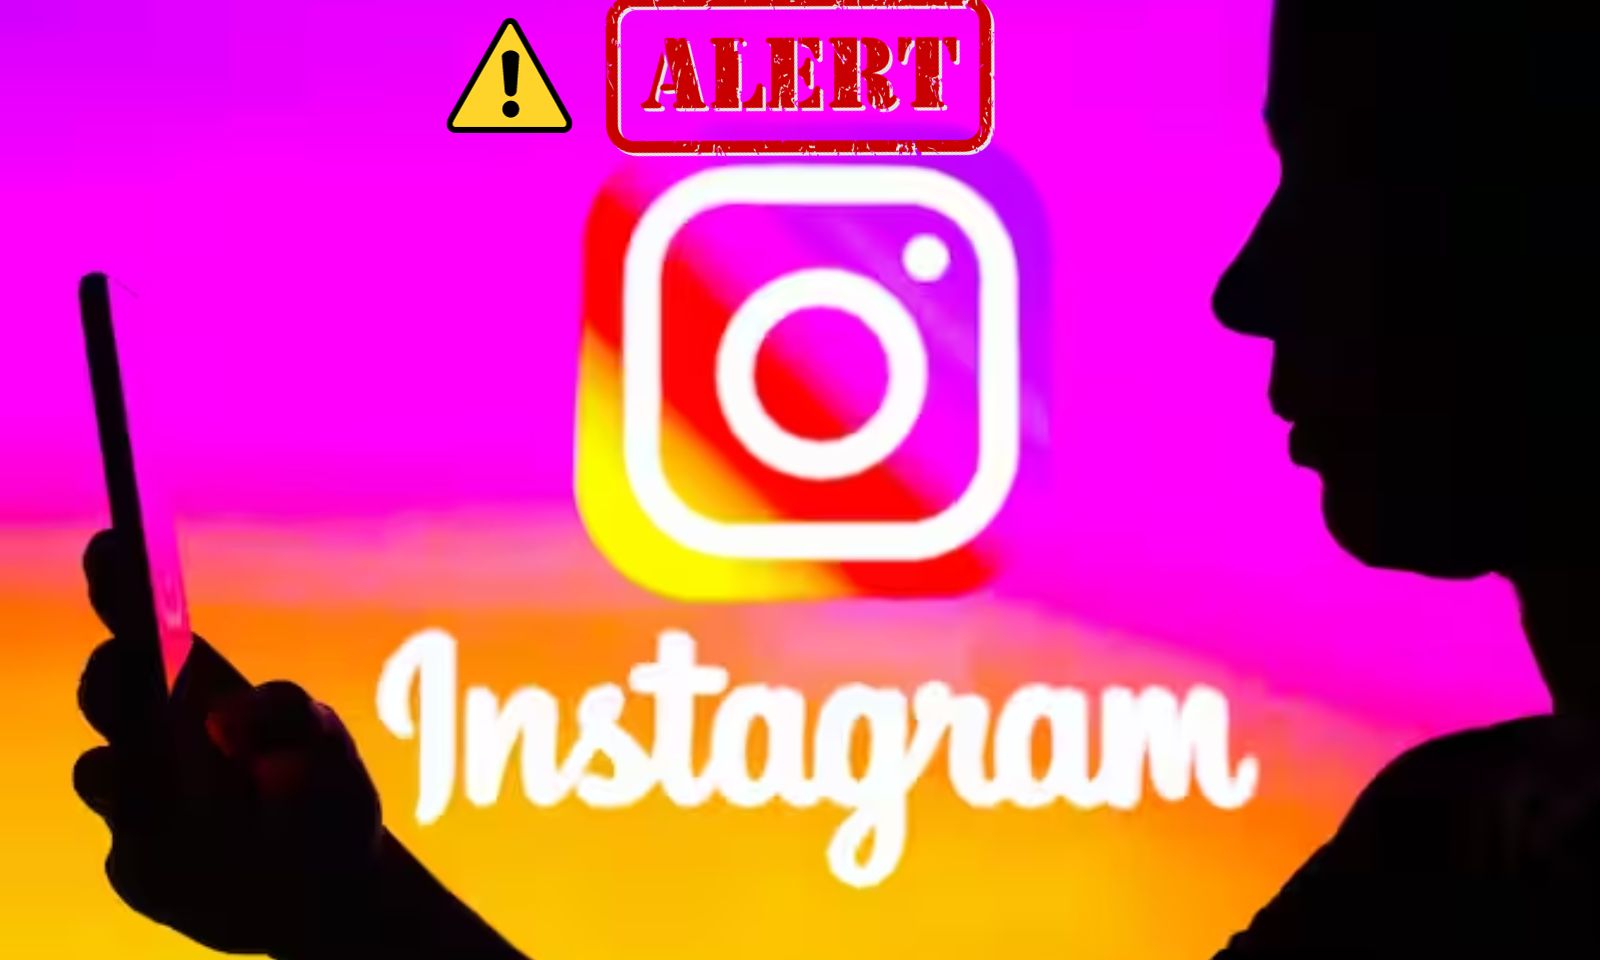 Instagram Investment Scam: Mumbai Woman Swindled of Rs 4.56 Crore in Cyber Fraud